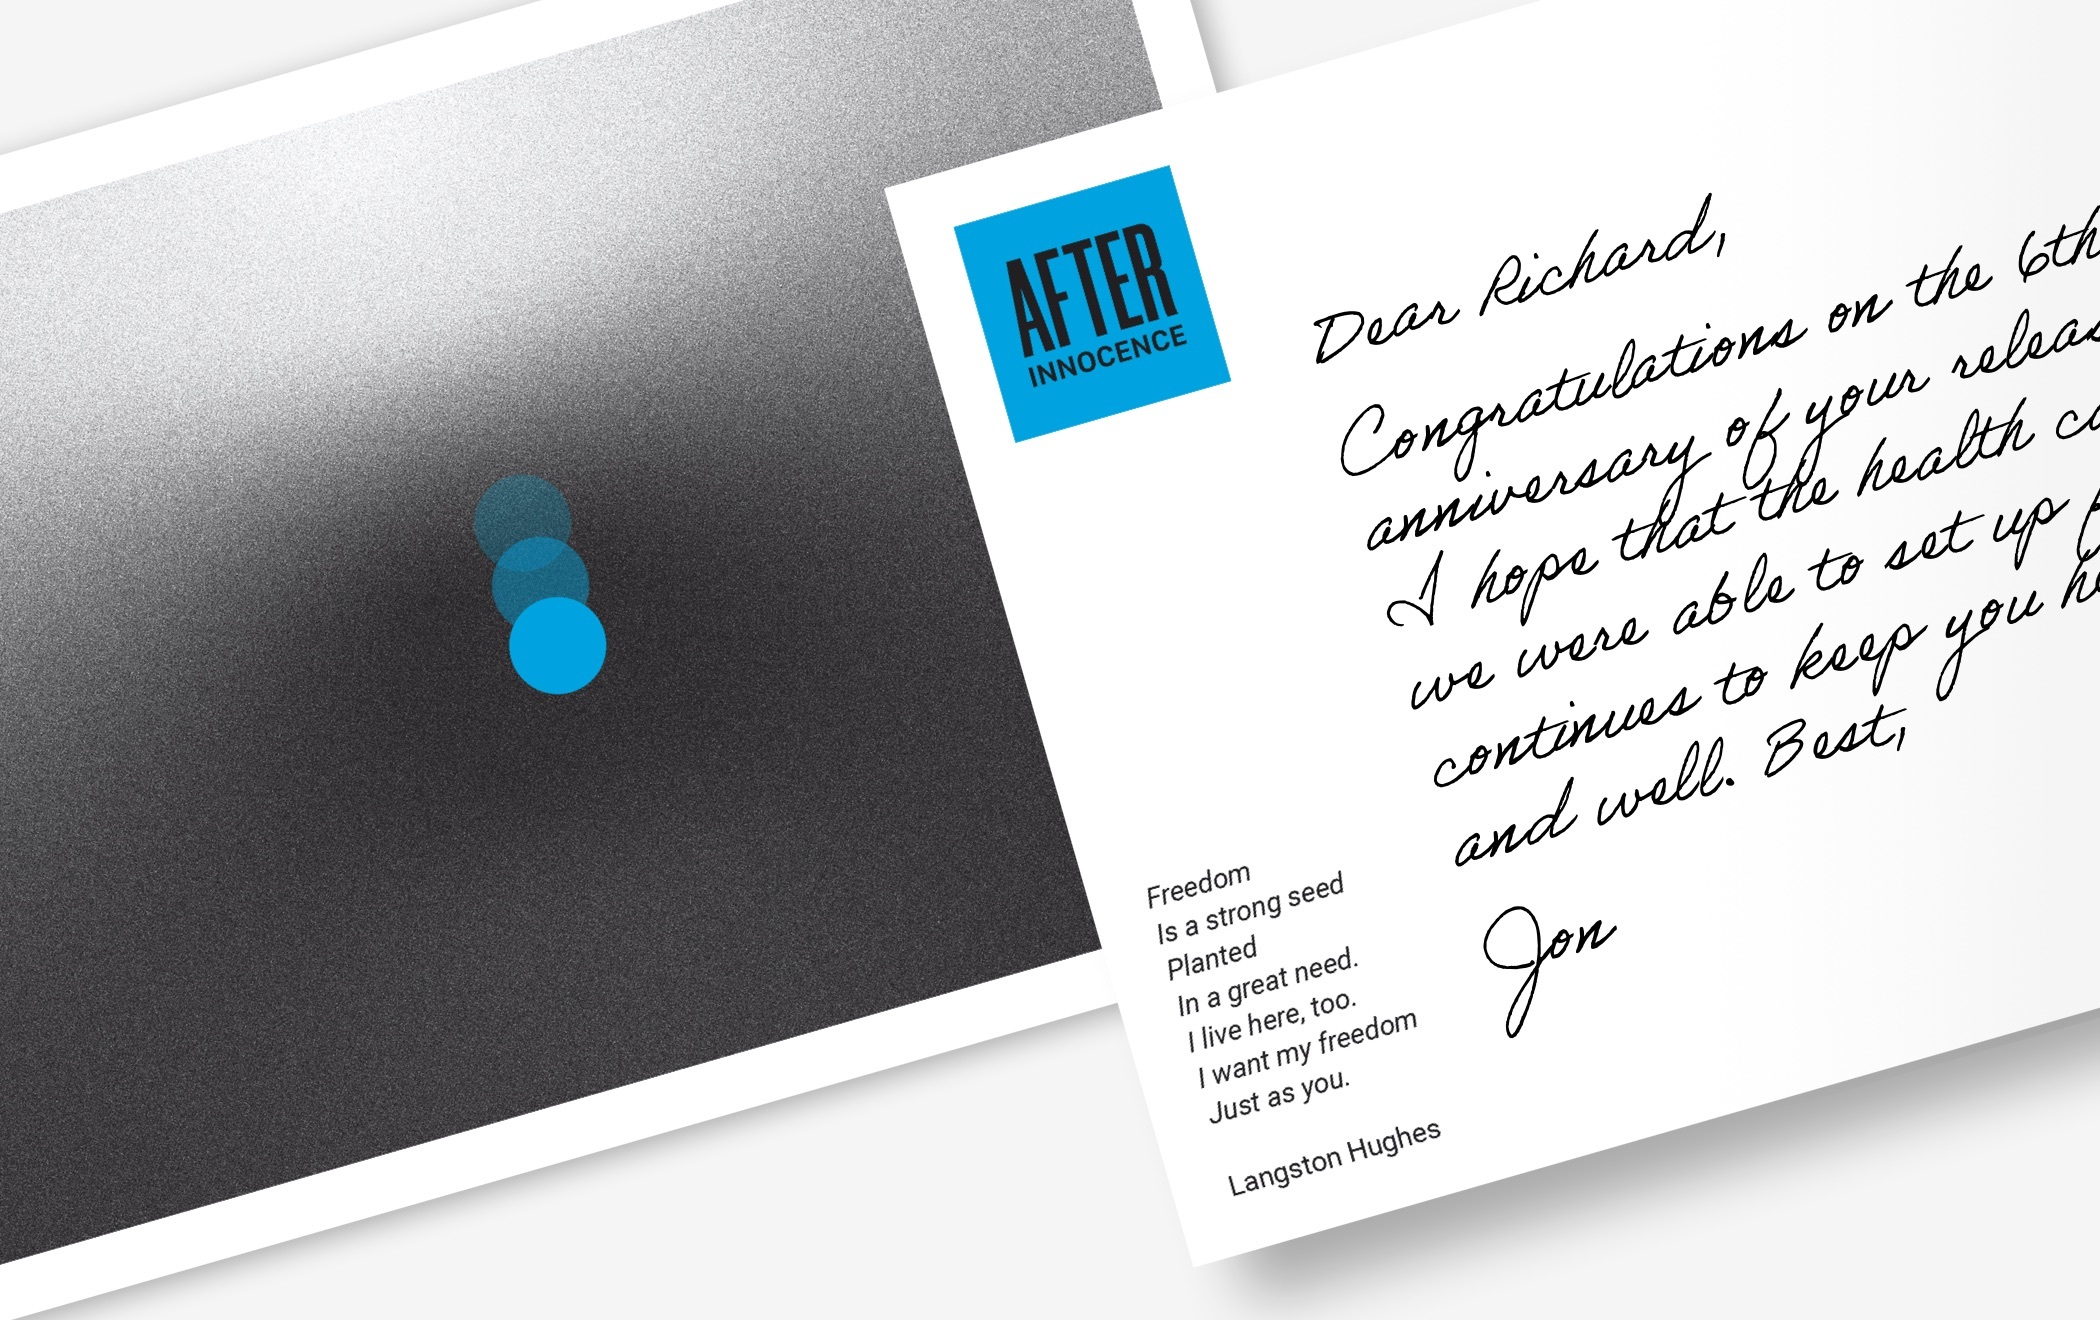 A photo of the After Innocence postcards featuring the organization’s logotype.